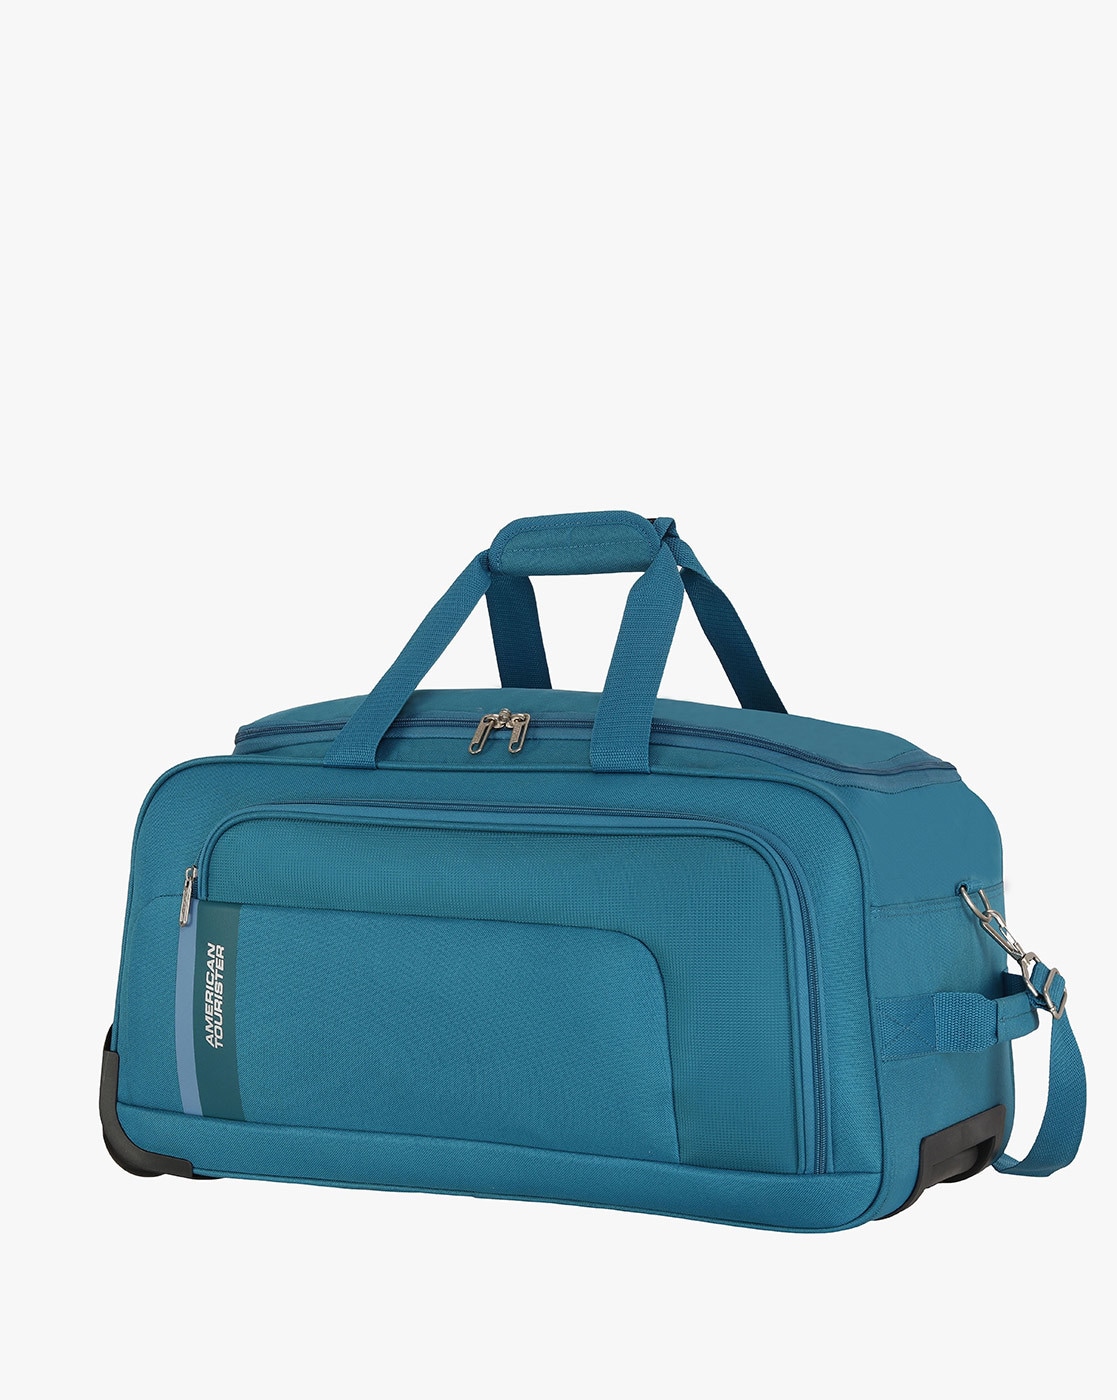 Small Cabin  Checkin Set 58 cm  by American Tourister Zaka Polyester  56 cms Softsided Luggage  Teal Price in India Full Specifications   Offers  DTashioncom